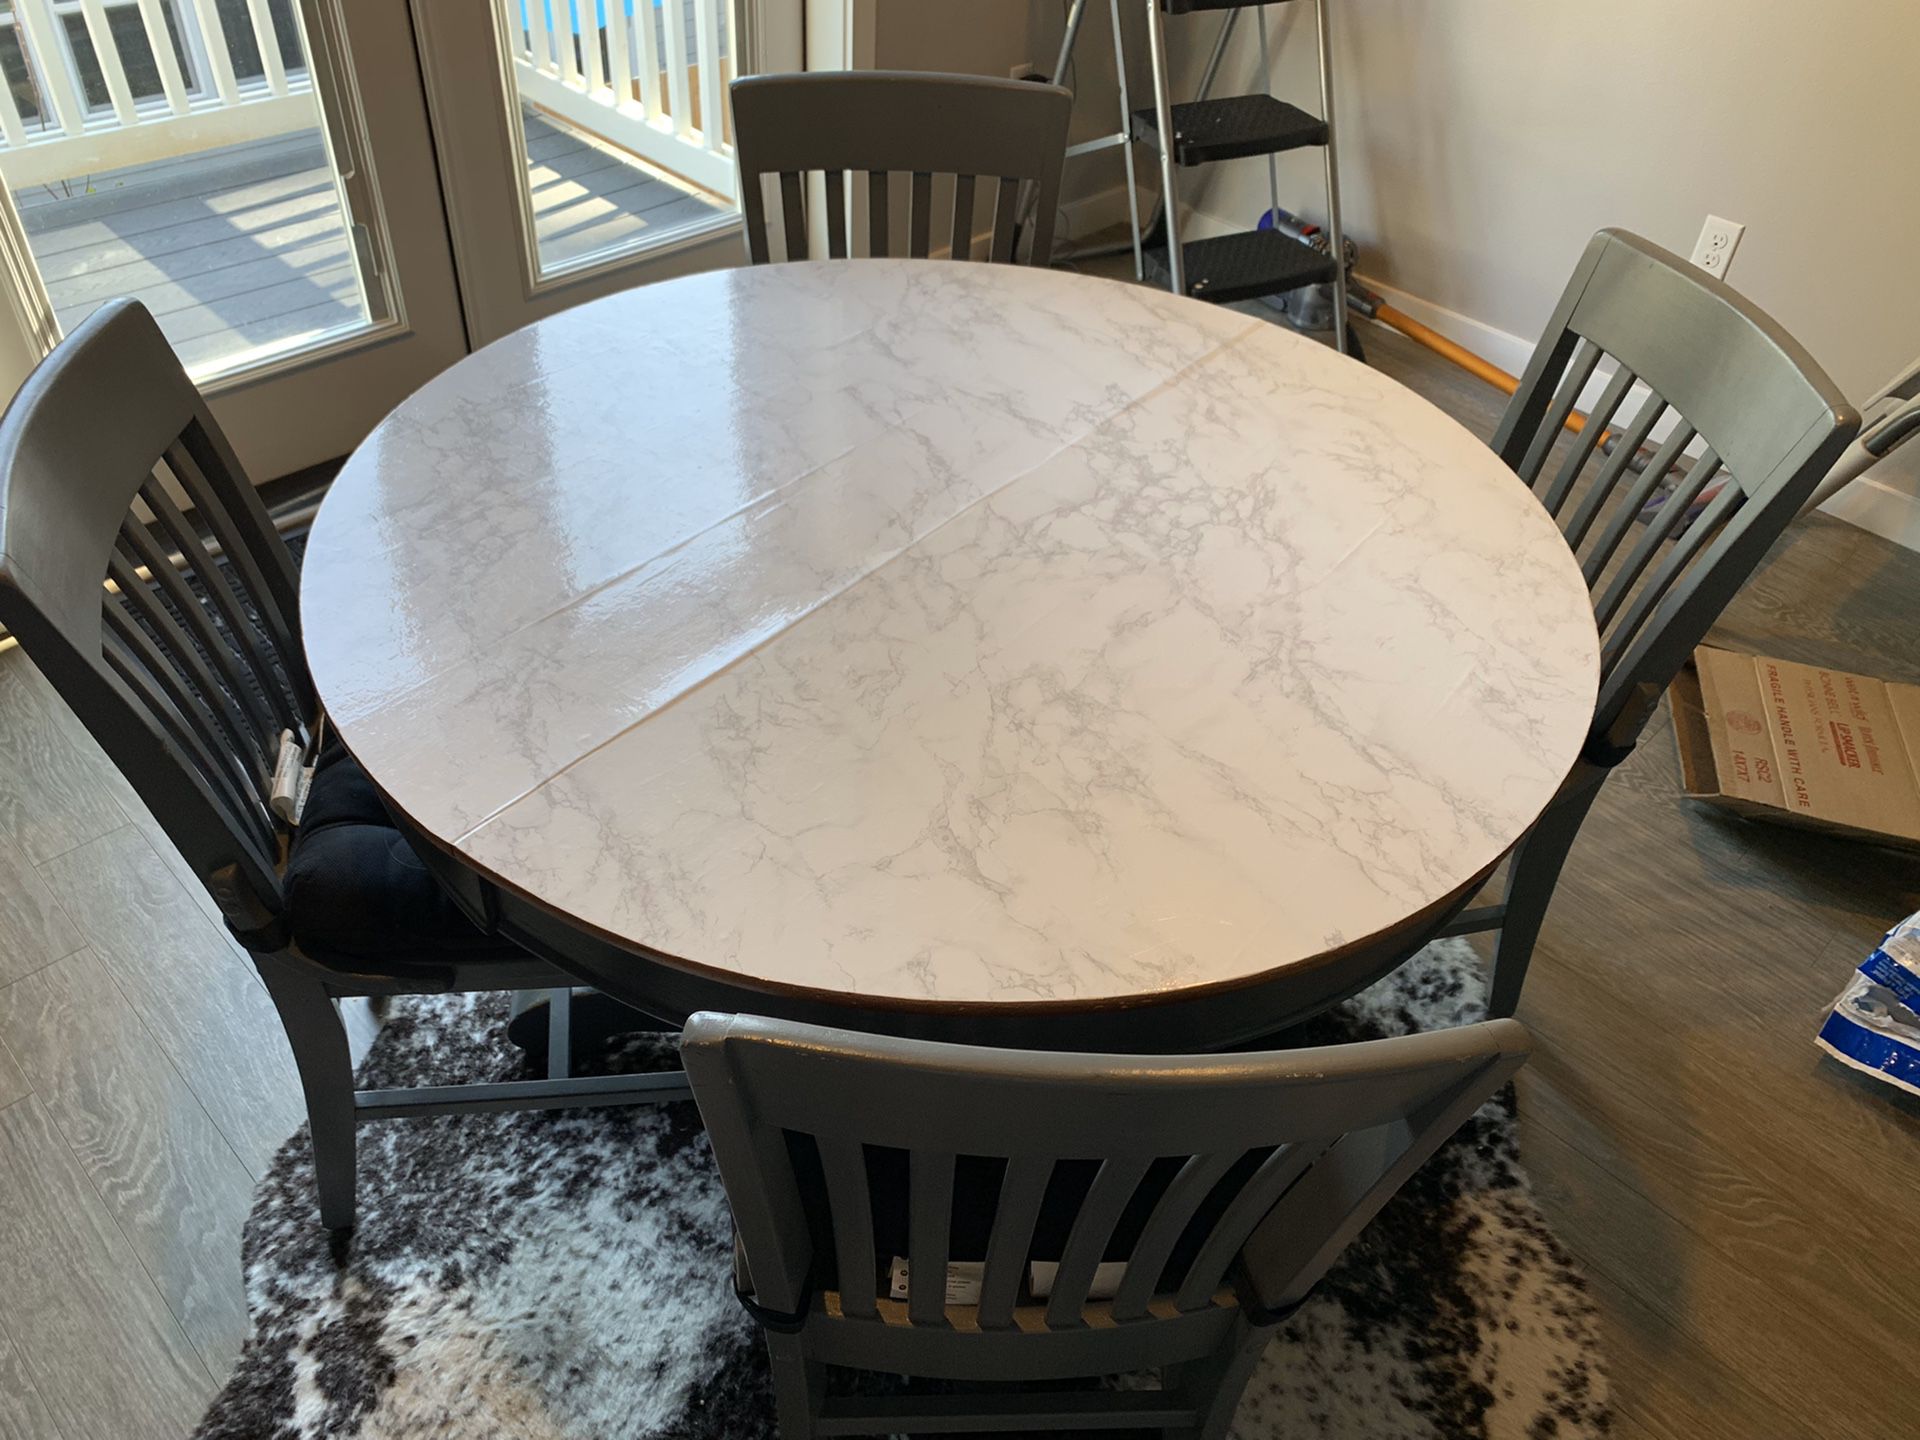 Repurposed round wooden table and chairs